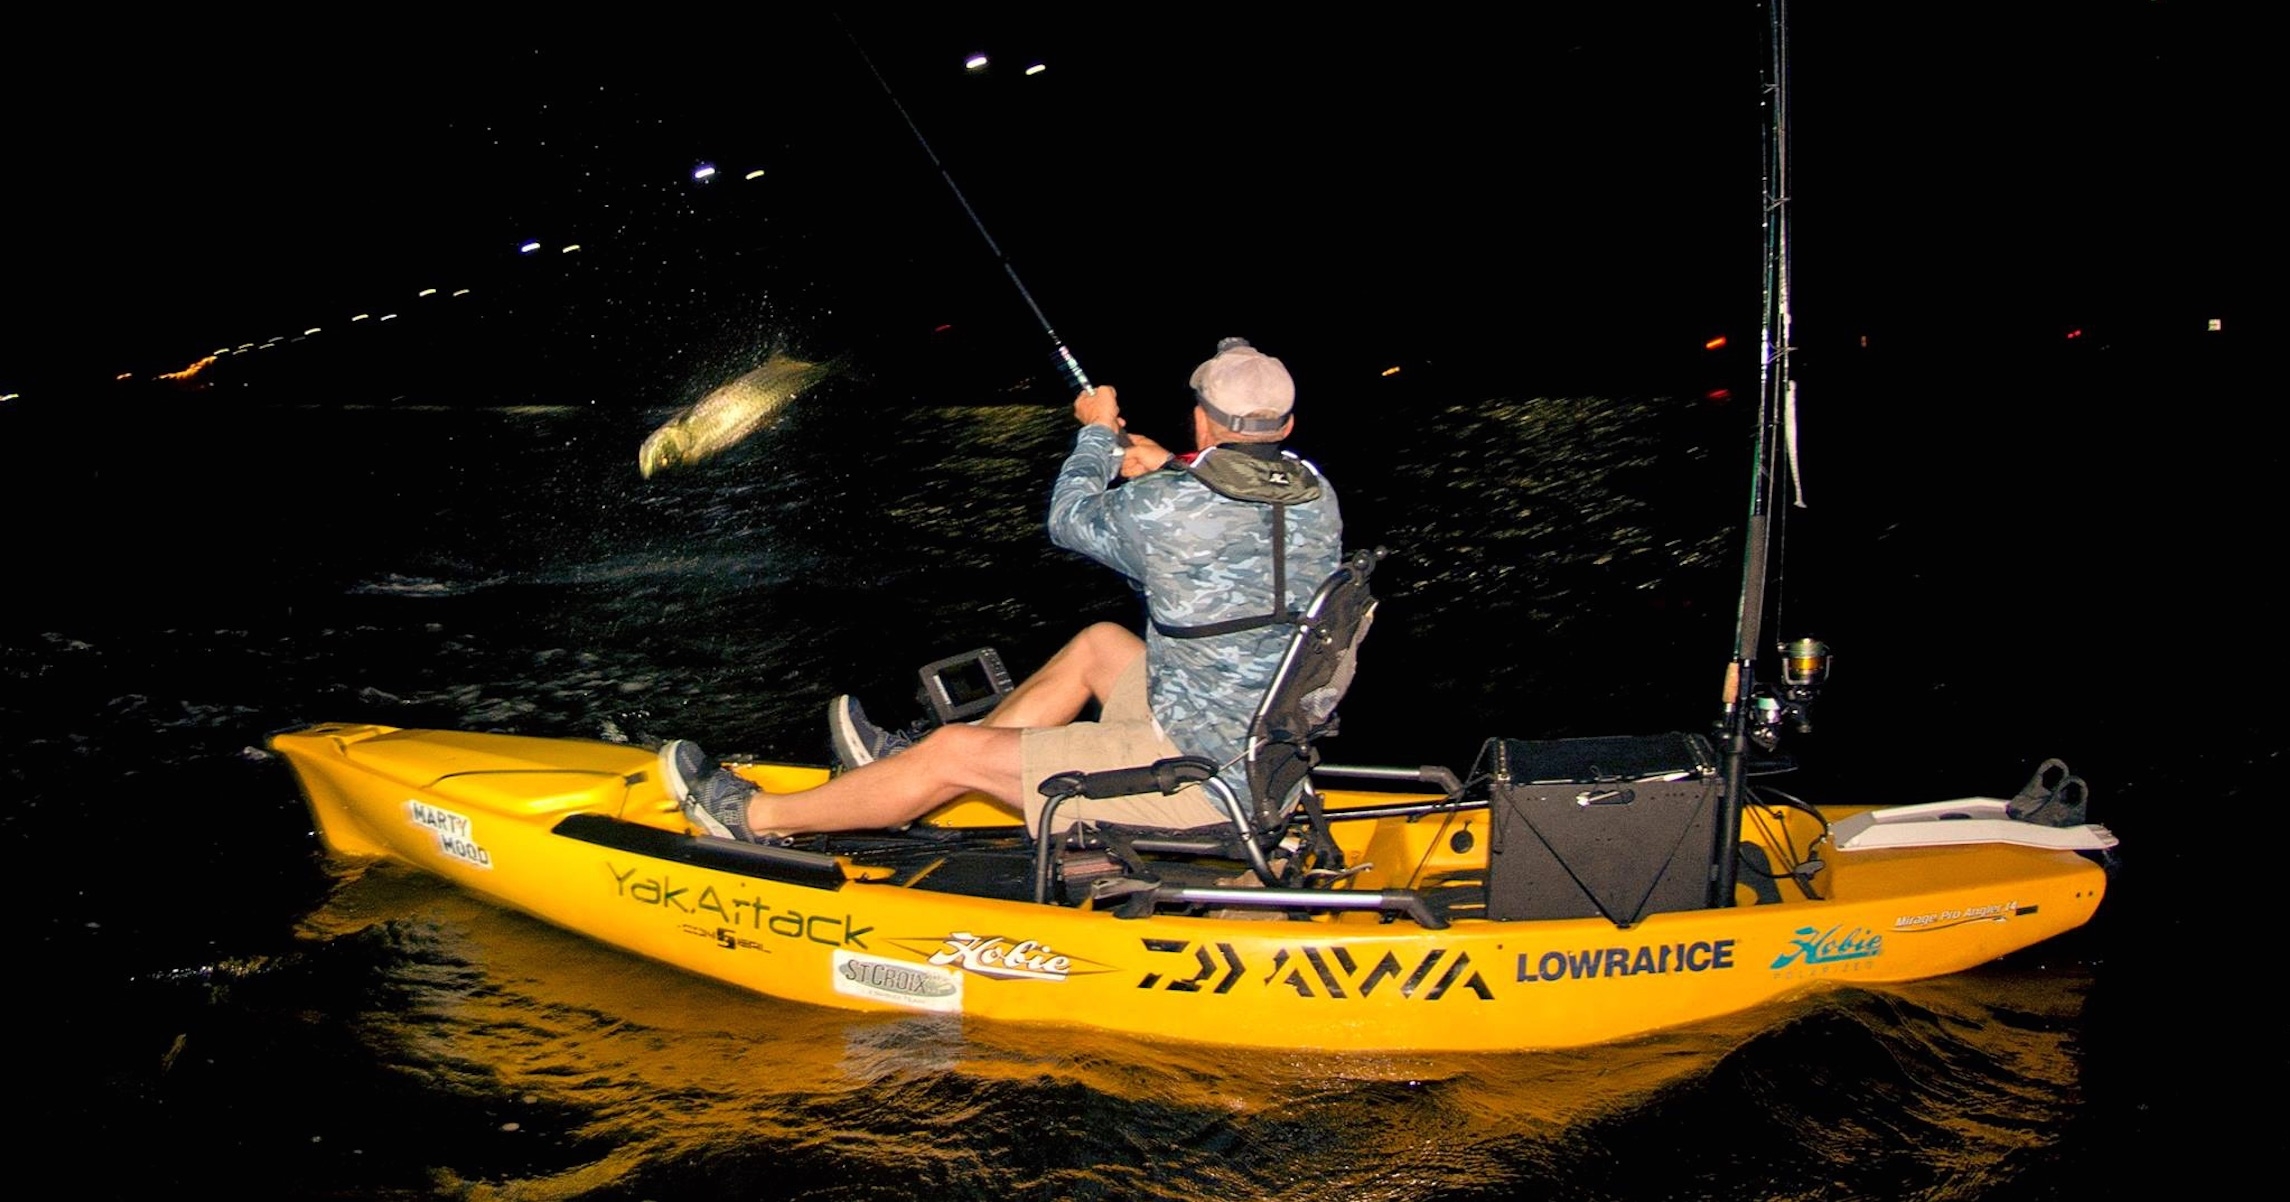 http://evening%20tarpon%20fishing%20out%20of%20a%20kayak%20with%20intrepid%20angler